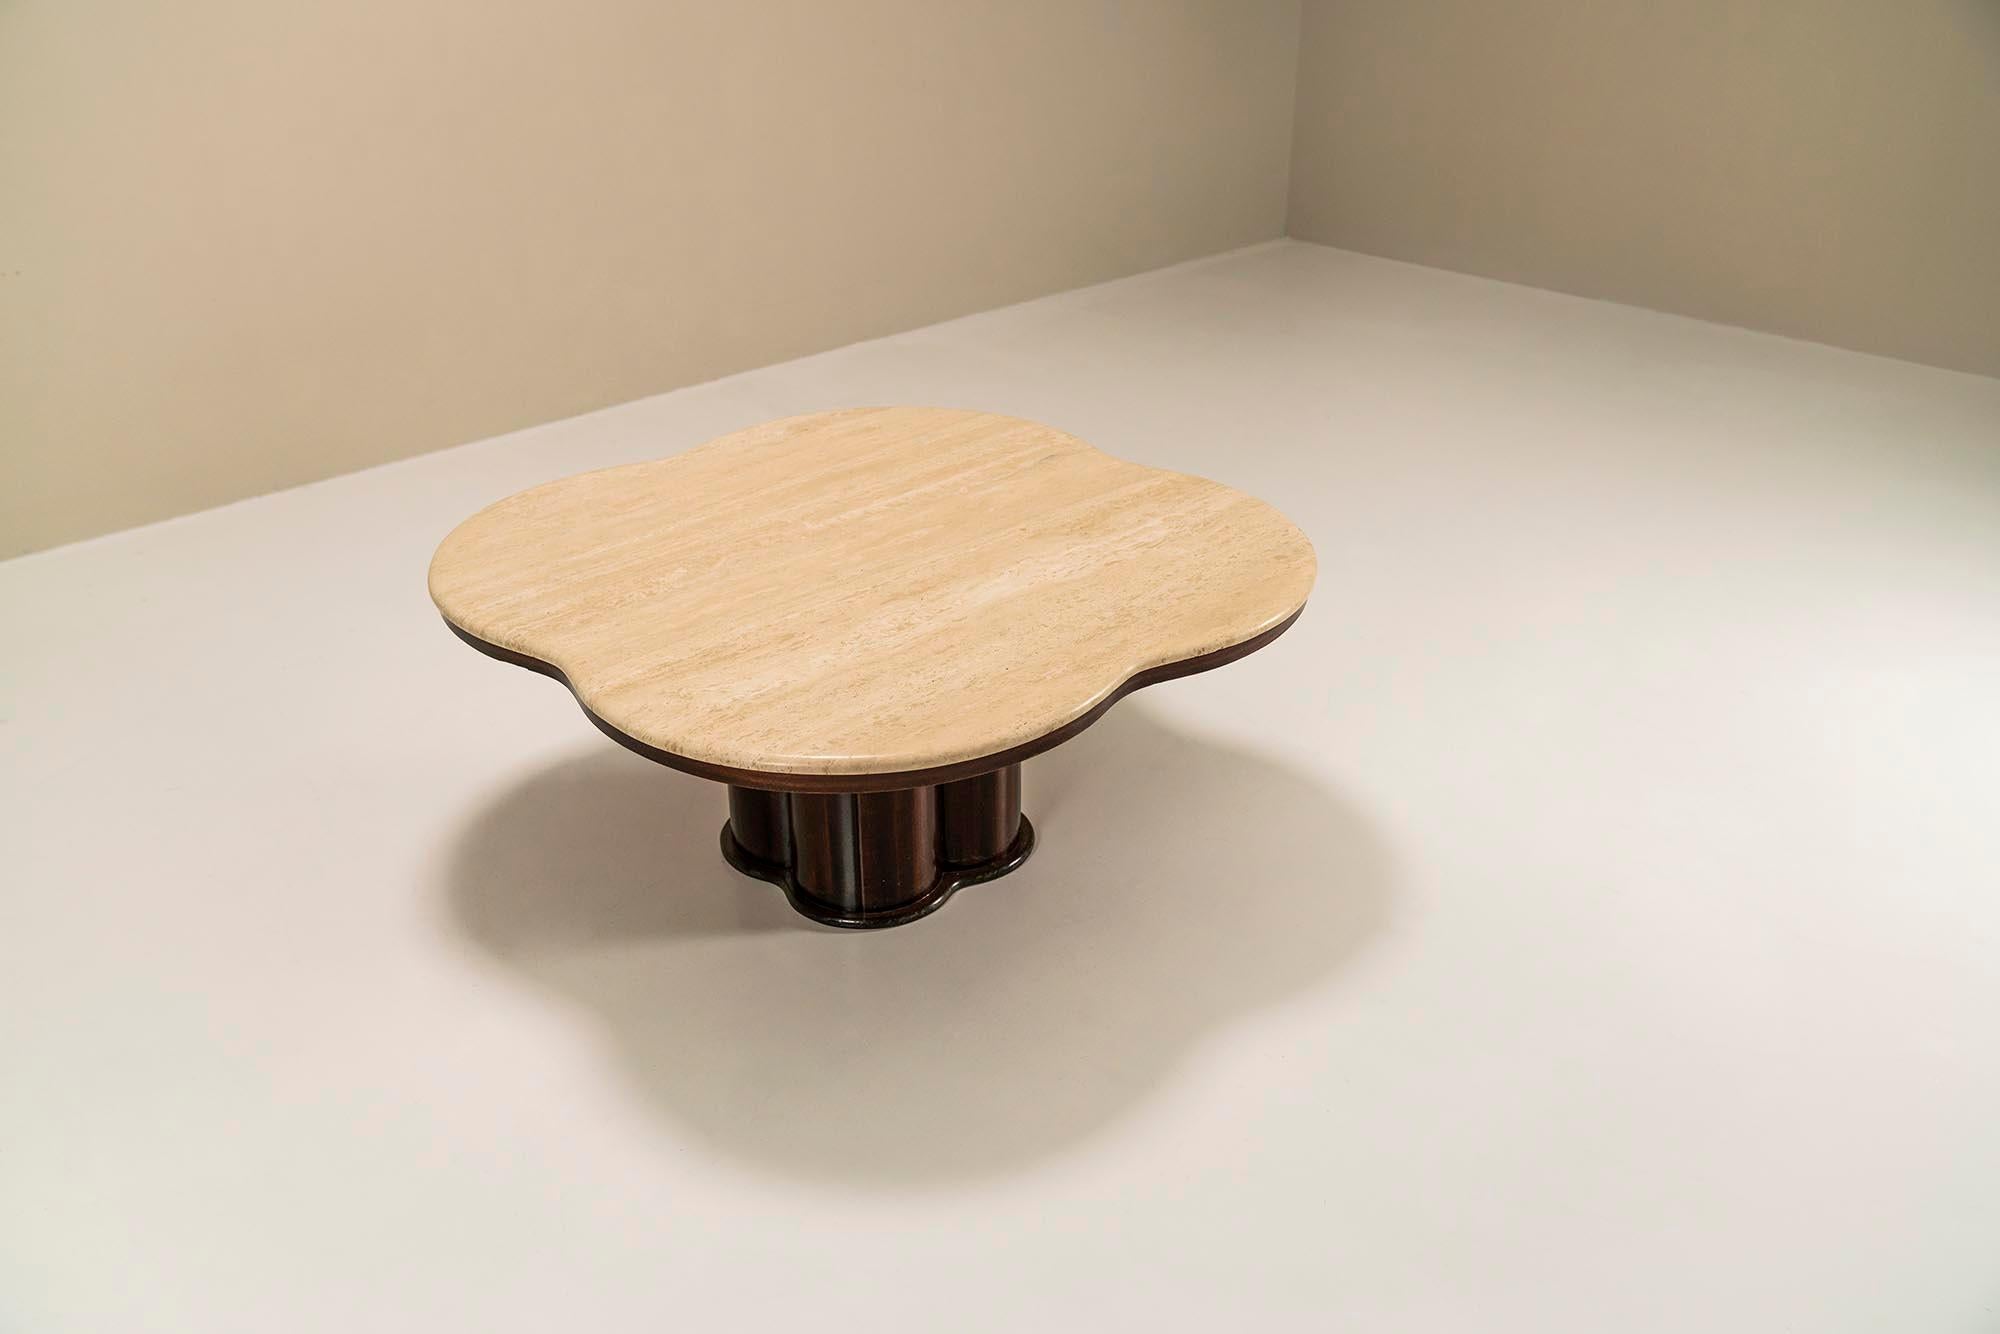 Mid-Century Modern Travertine Clover Shaped Coffee Table With Wooden Base, France 1970's.